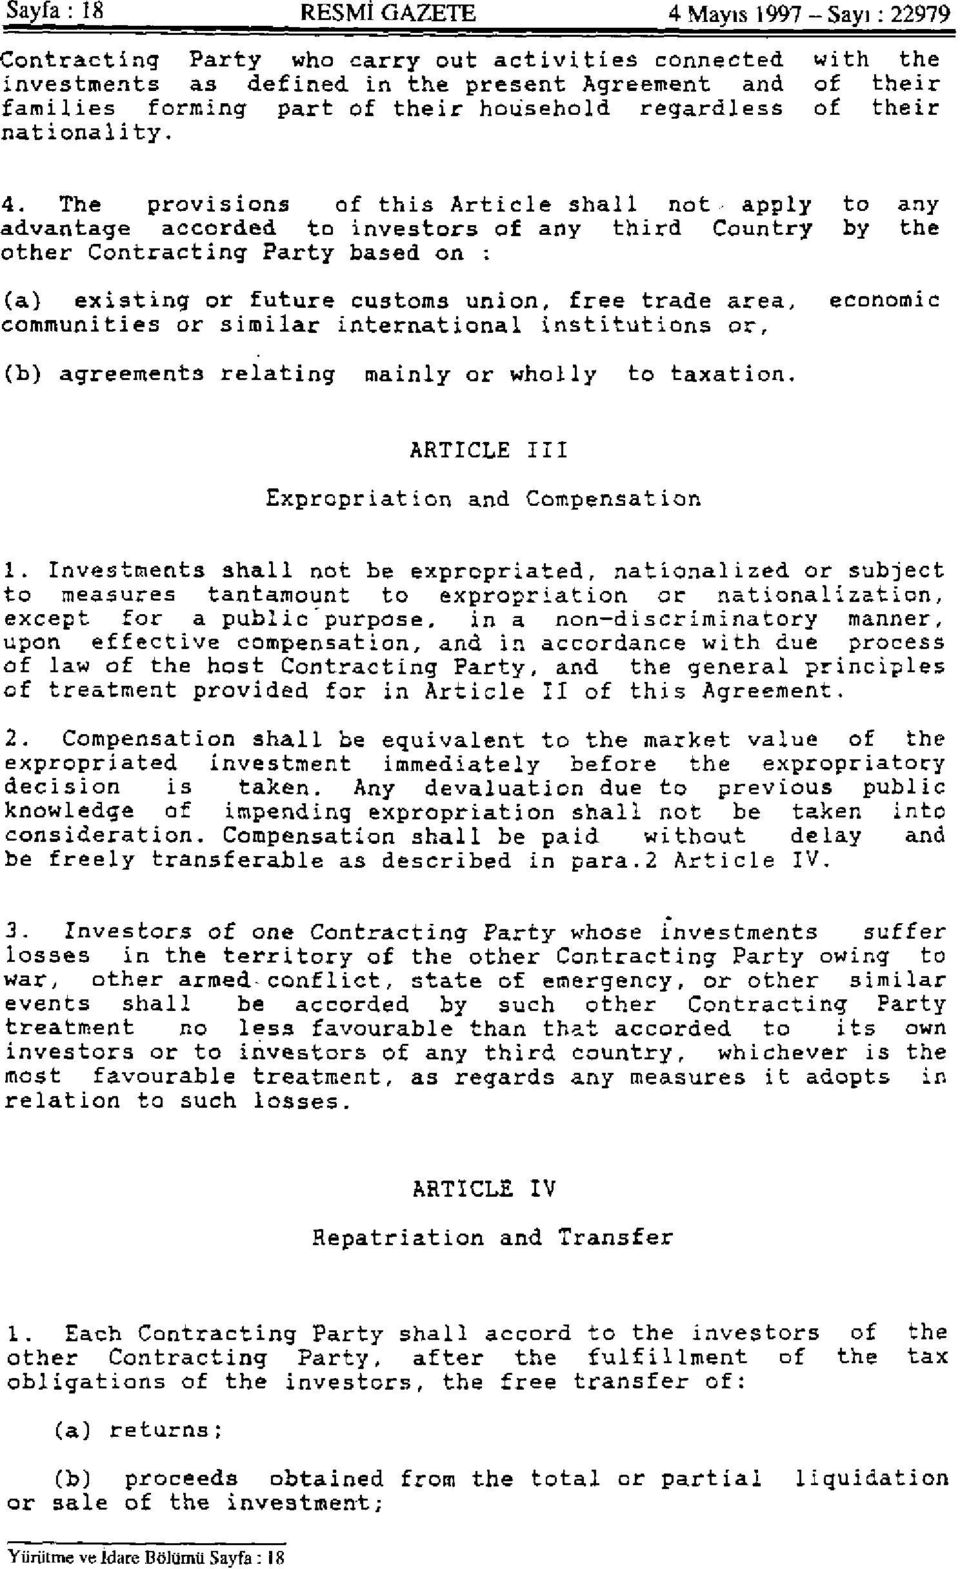 The provisions of this Article shall not- apply to any advantage accorded to investors of any third Country by the other Contracting Party based on : (a) existing or future customs union, free trade